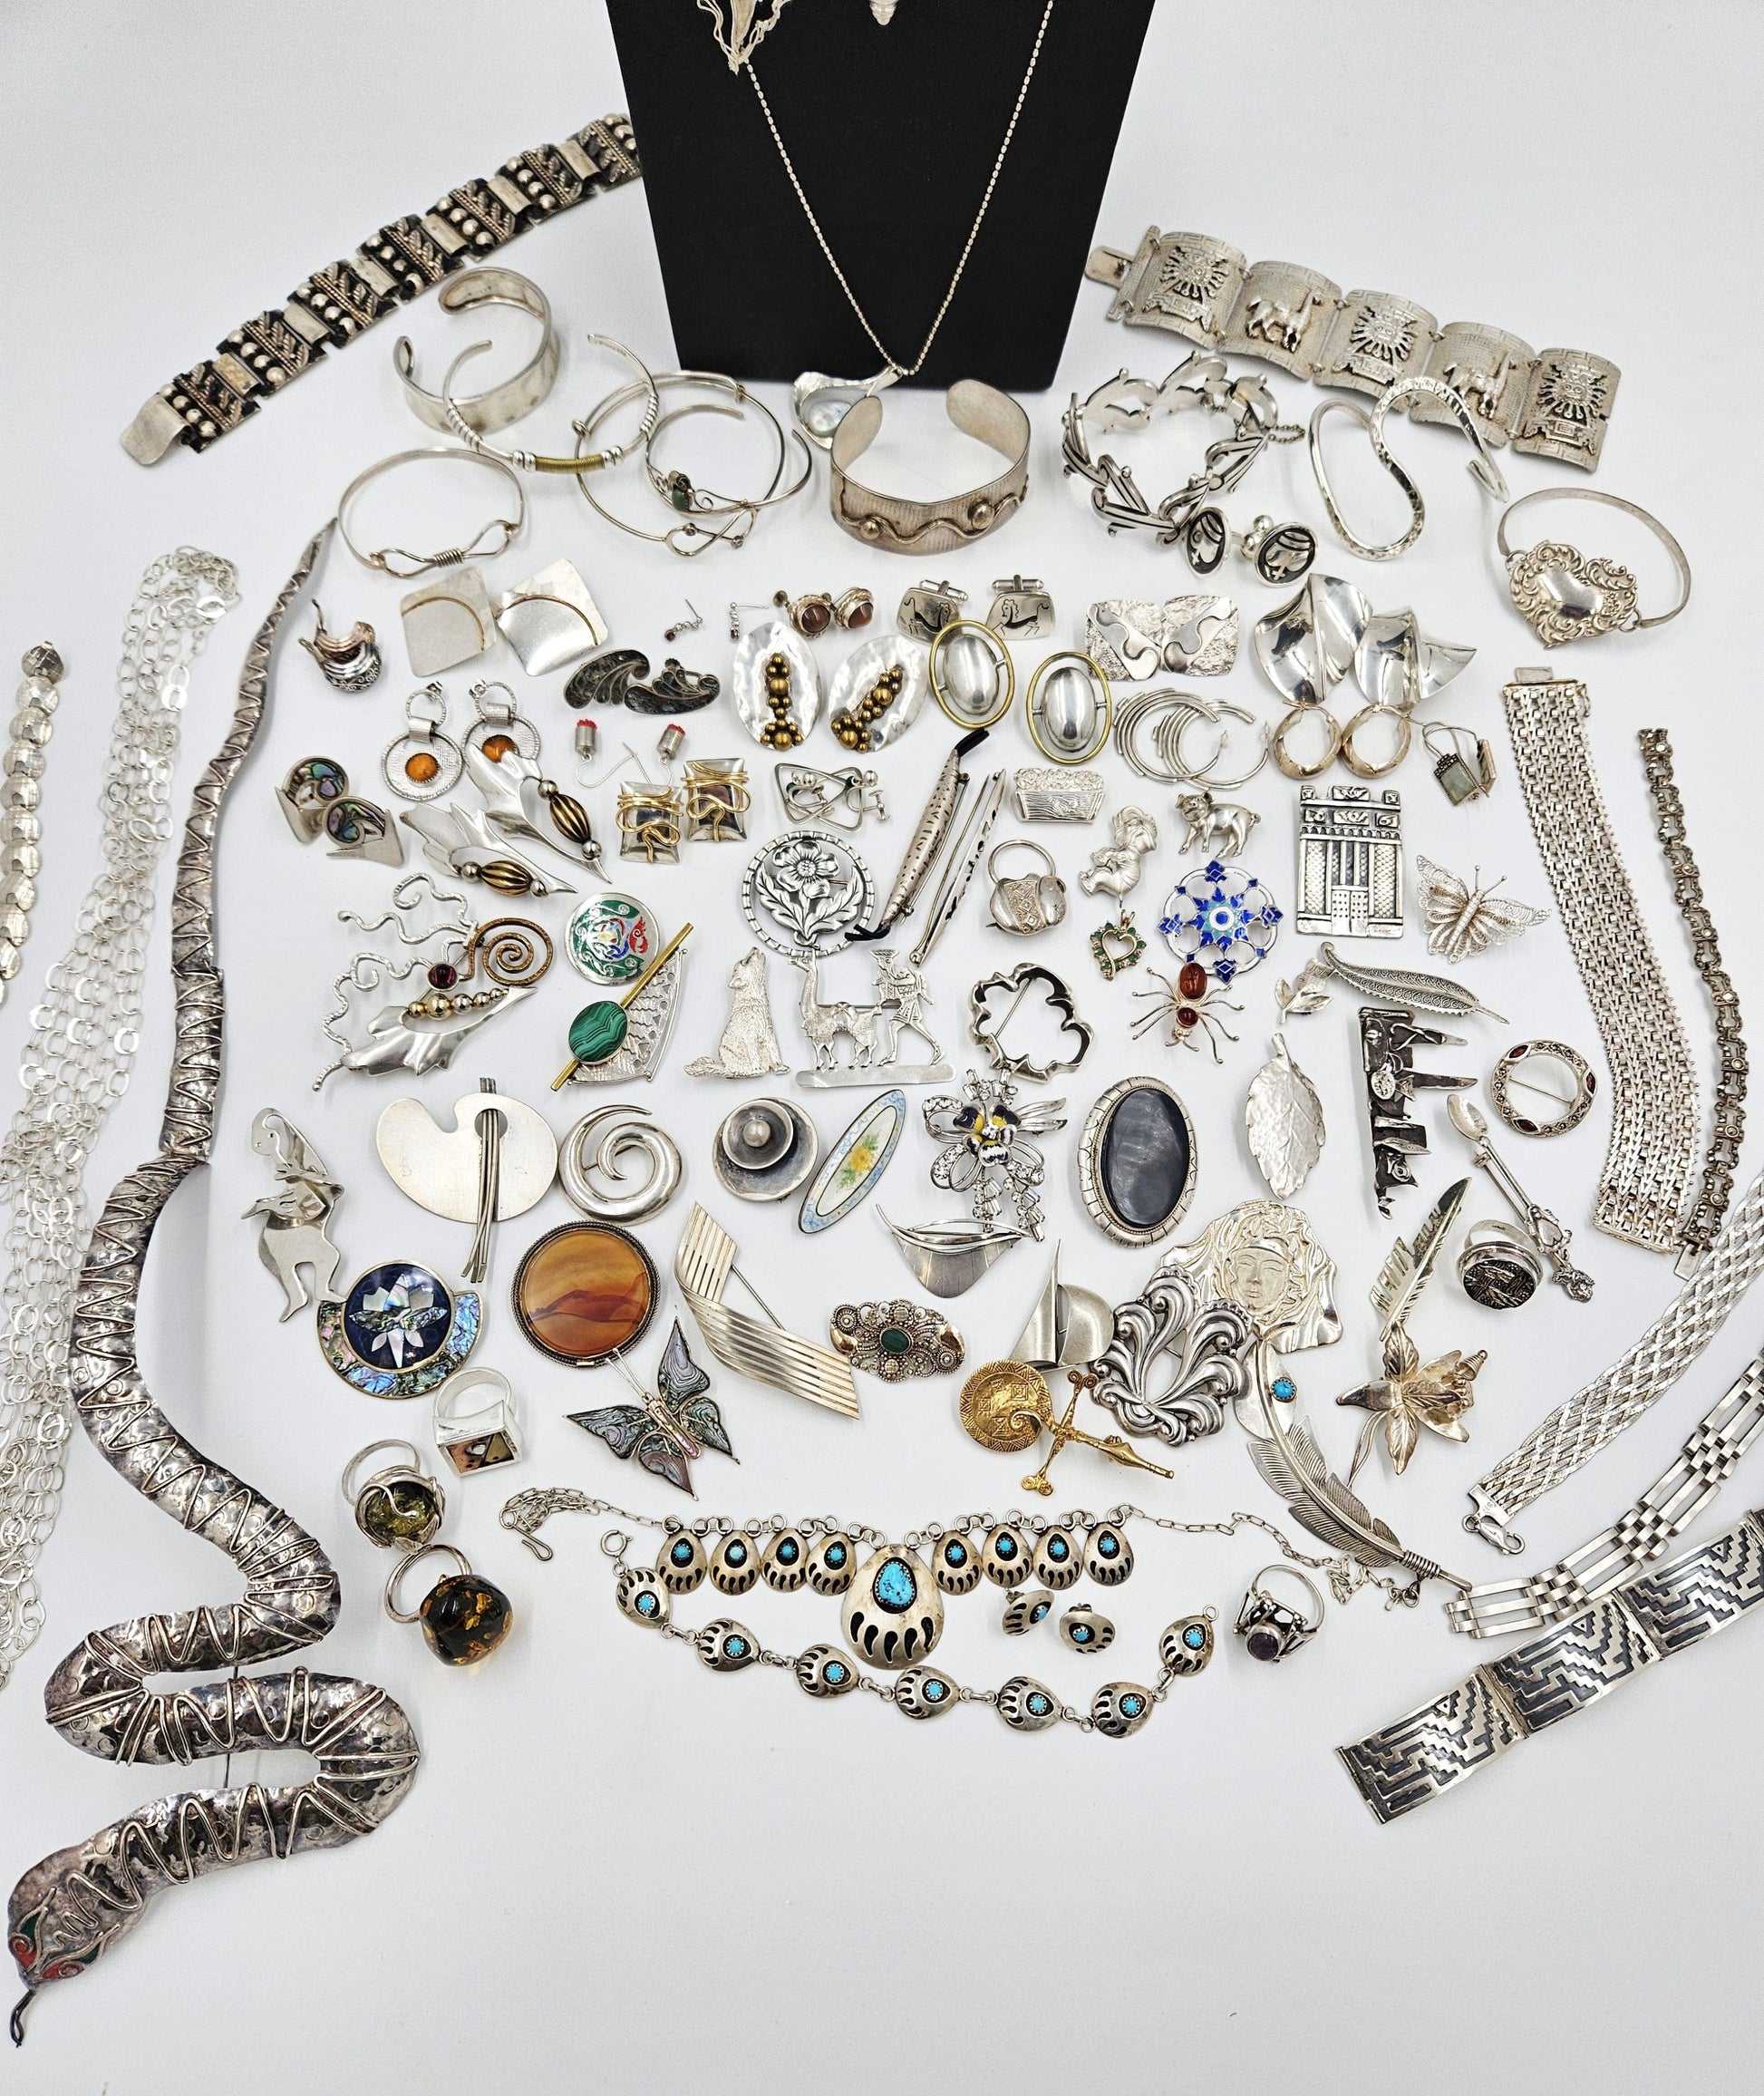 Estate Silver Jewelry Huge Resellers Fine Jewelry Lot 200+ Pieces Sterling Semi Precious Stones More